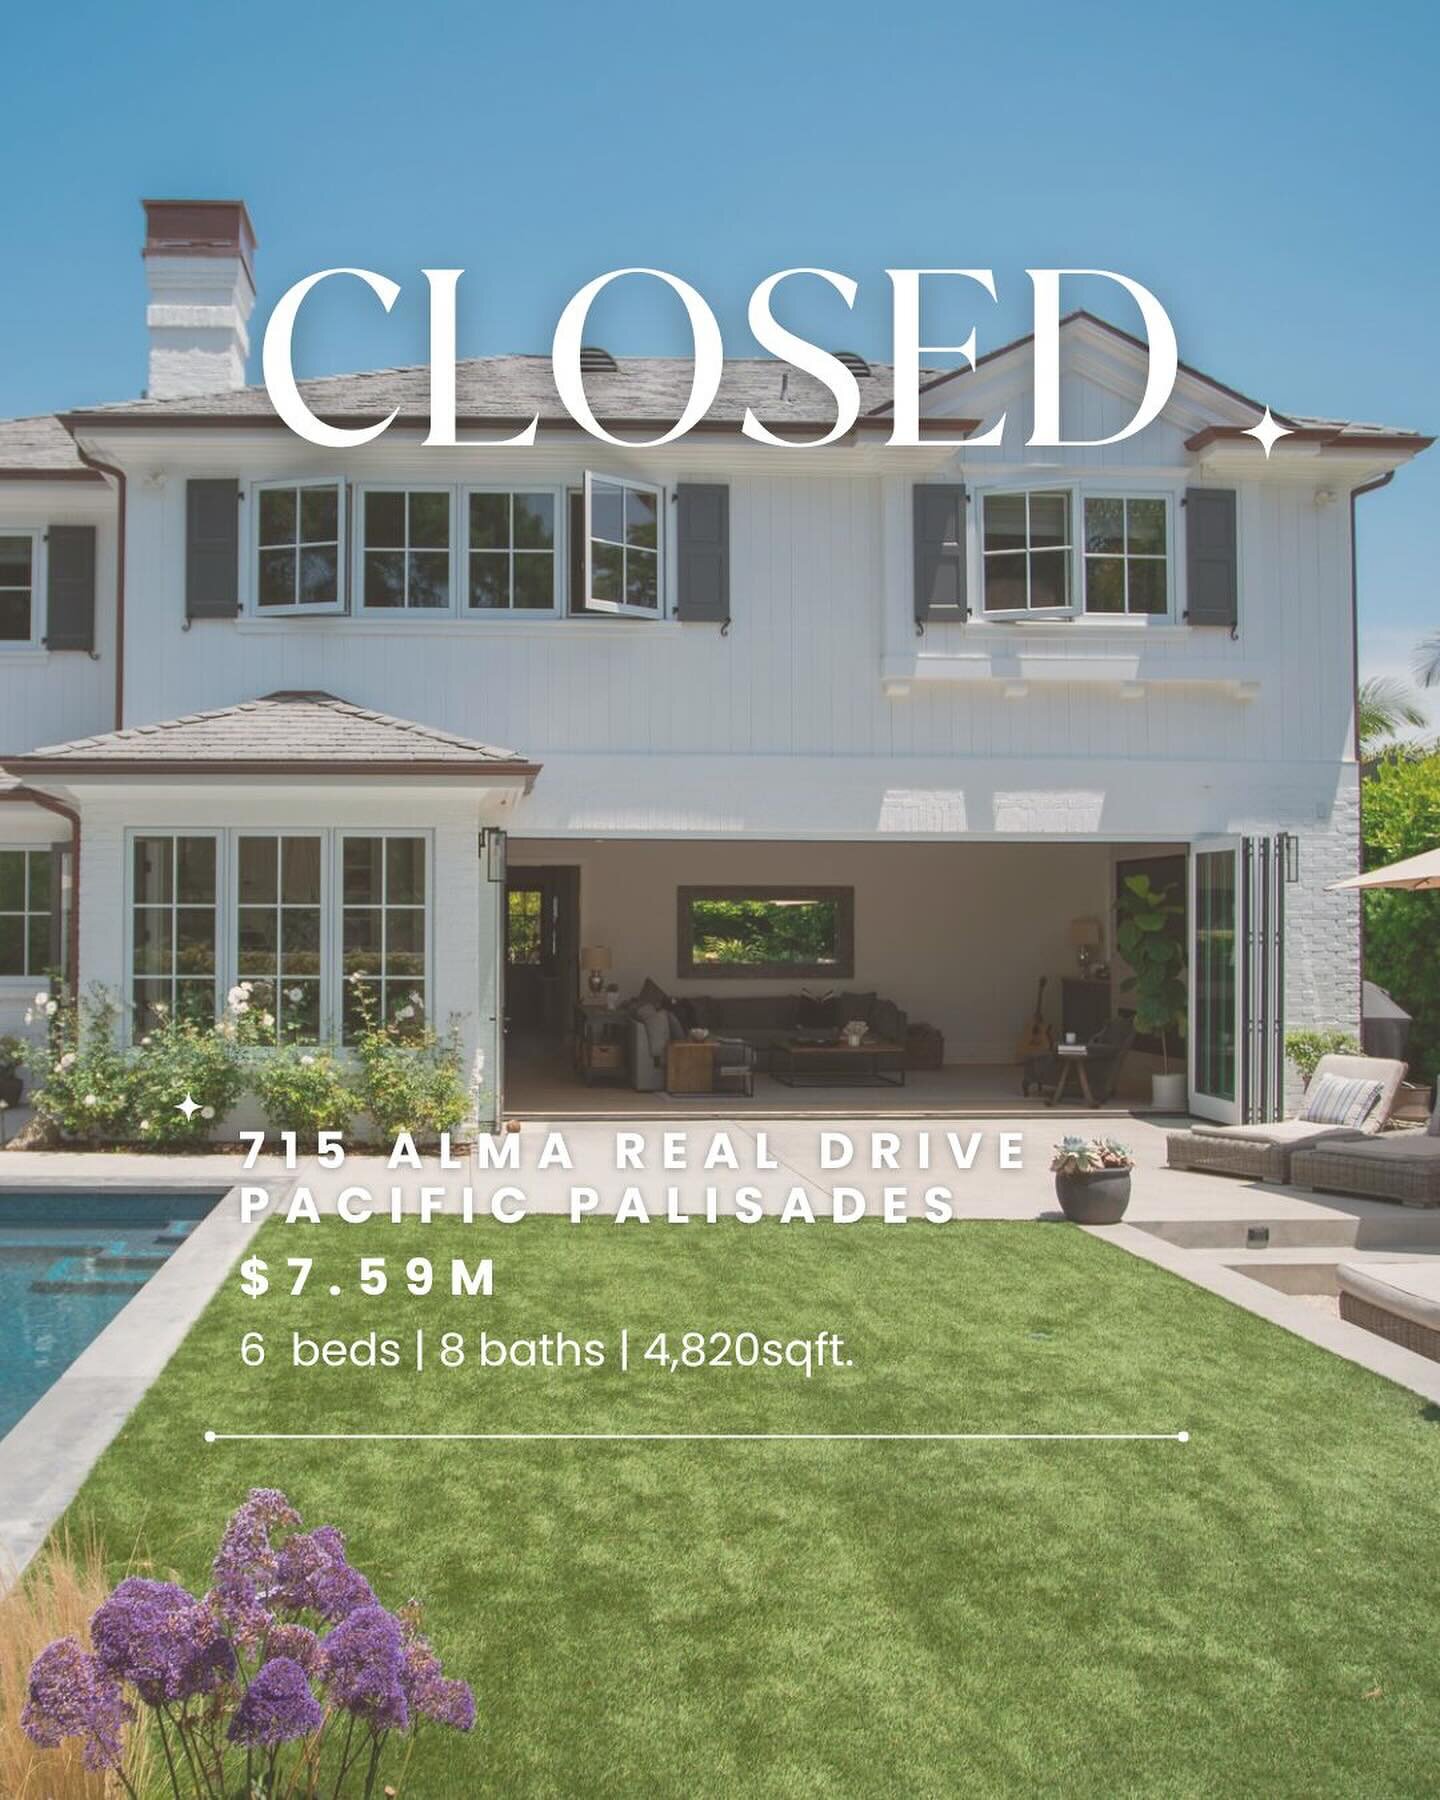 Throwback Transaction: Huntington Palisades, Pacific Palisades, CA 90272

6 Bed | 8 Bath | Closed at $7,599,000 

REPRESENTED THE BUYERS

This was a newly built classic California Coastal home with modern features in the Huntington Palisades. Designe